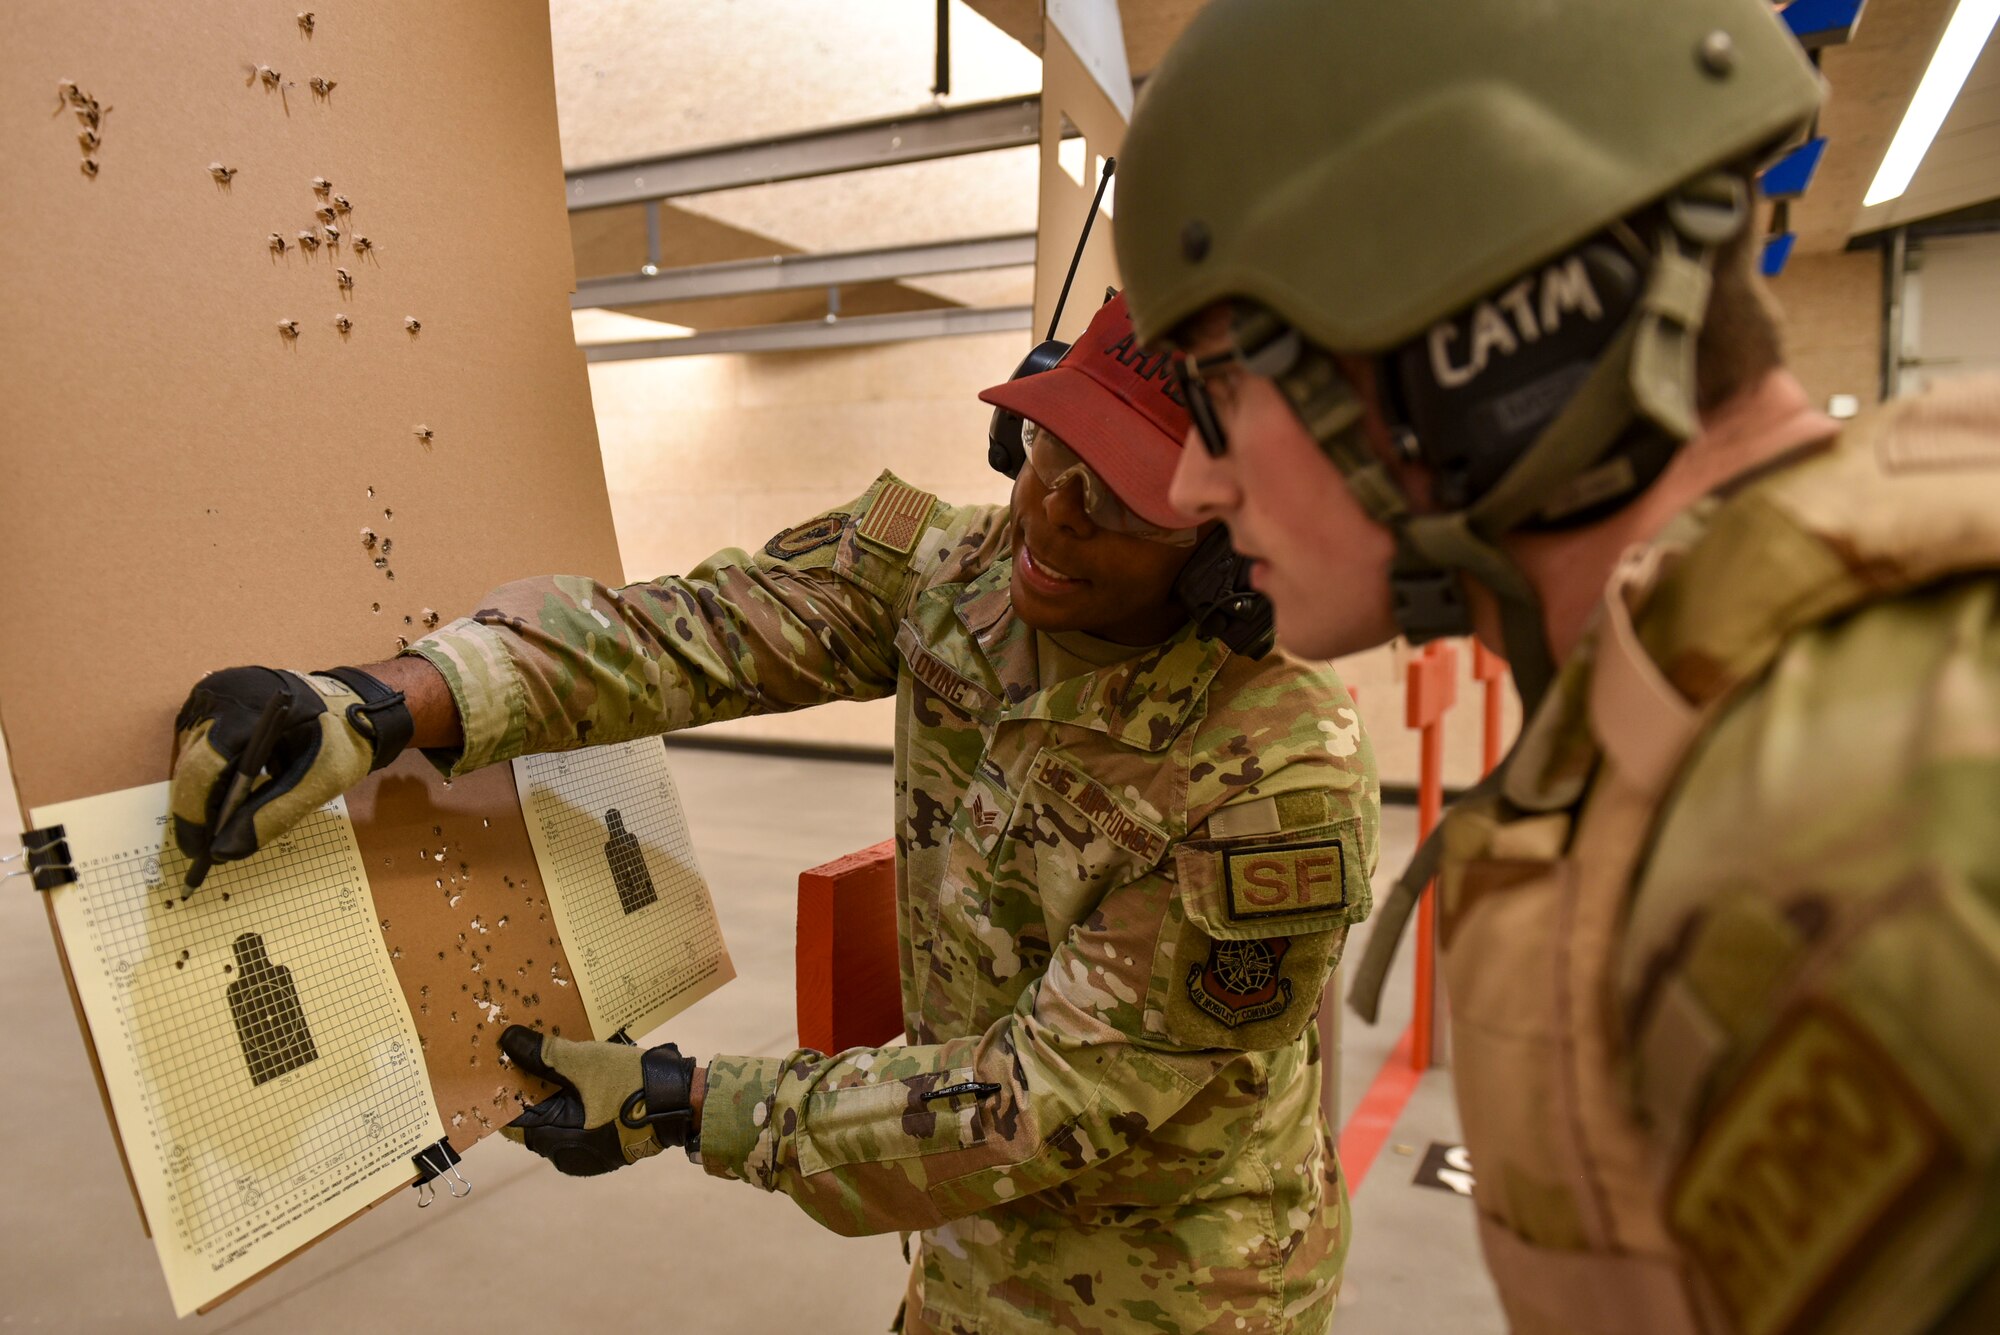 A Combat Arms Instructor reviews a firing target with another Airman.